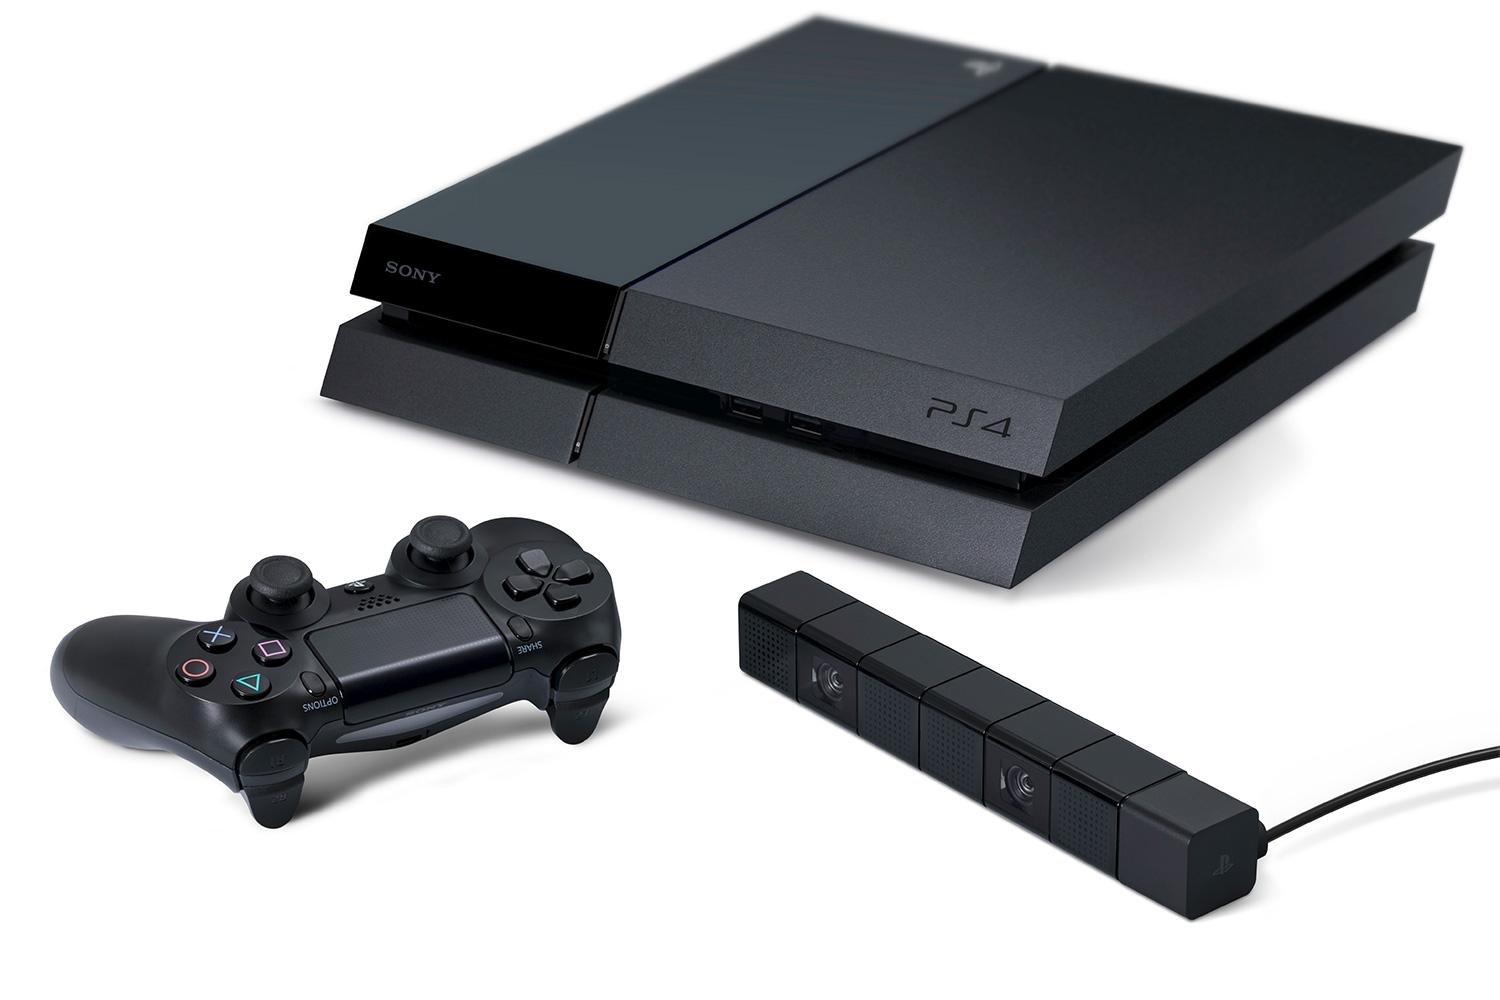 PlayStation Black Friday Cyber Monday 2013 Deals Sales